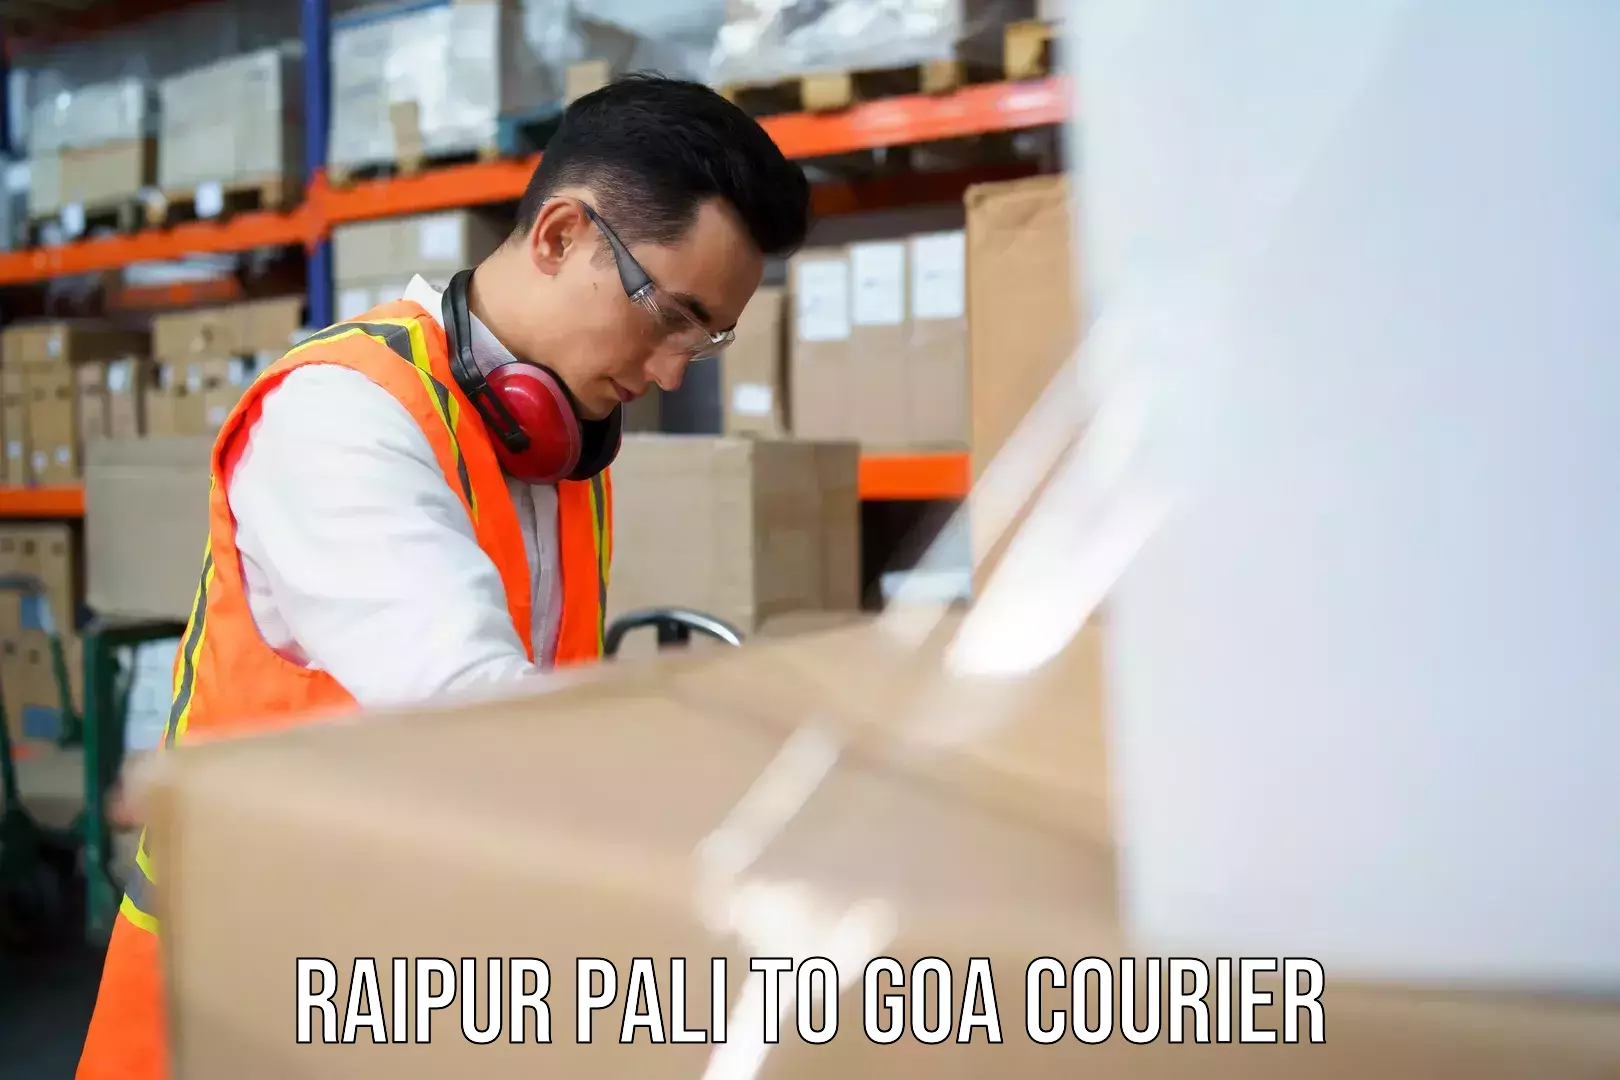 Expedited parcel delivery Raipur Pali to Goa